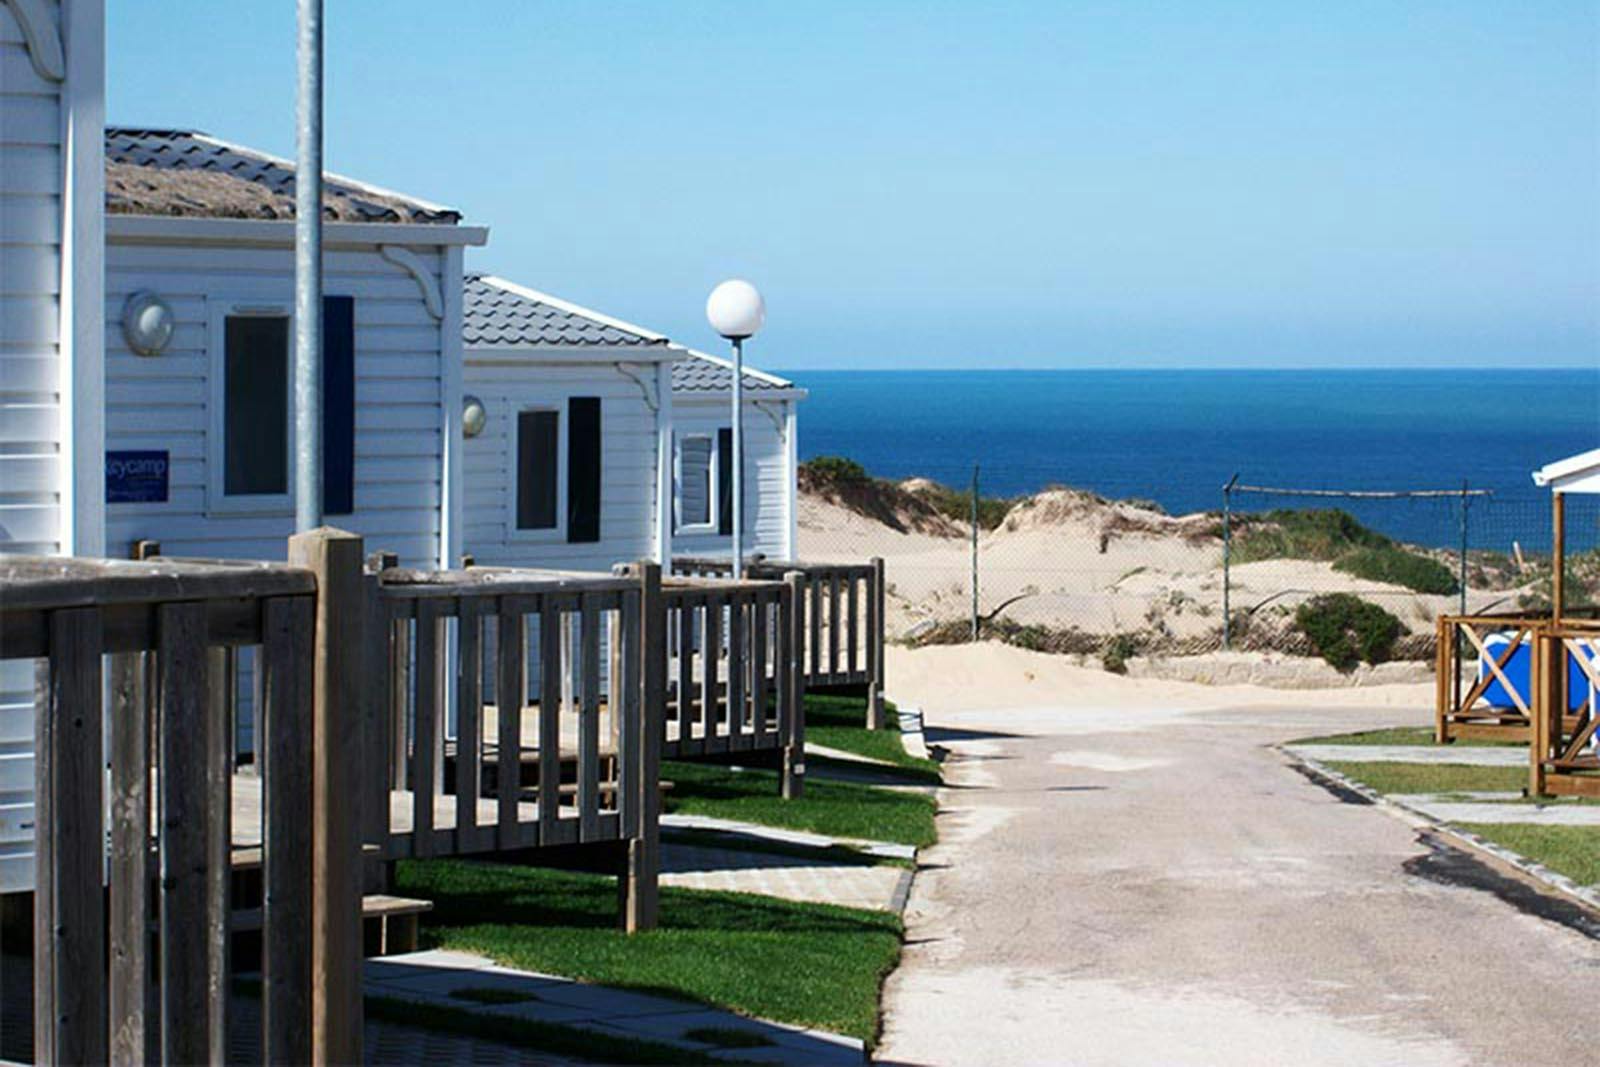 Orbitur Guincho offers fully equipped campervan-ready campsites near Lisbon